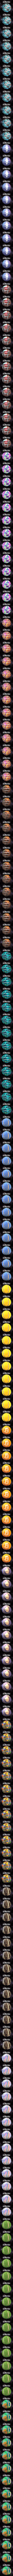 ethMarbles collection image